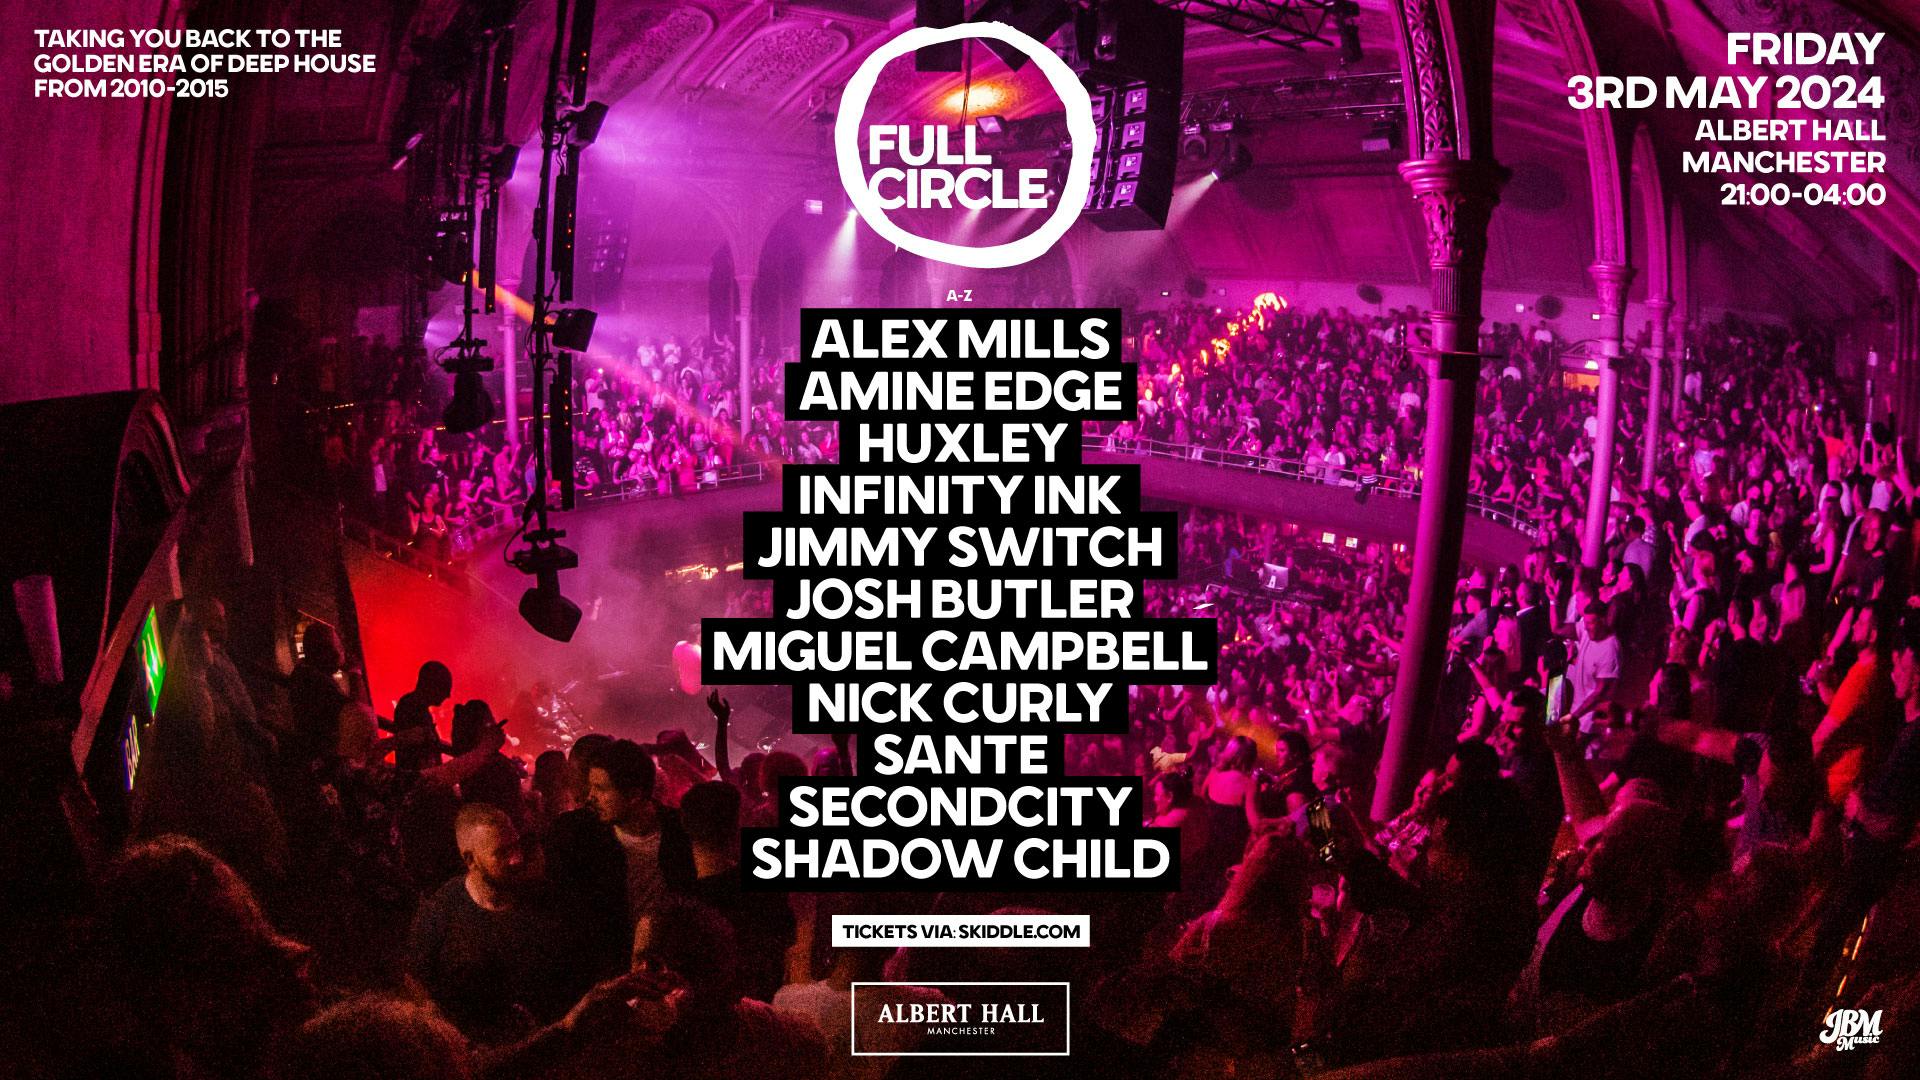 Full Circle: Alex Mills, Amine Edge, Huxley, Infinity Ink, Jimmy Switch, Josh Butler B2B Secondcity, Miguel Campbell + more